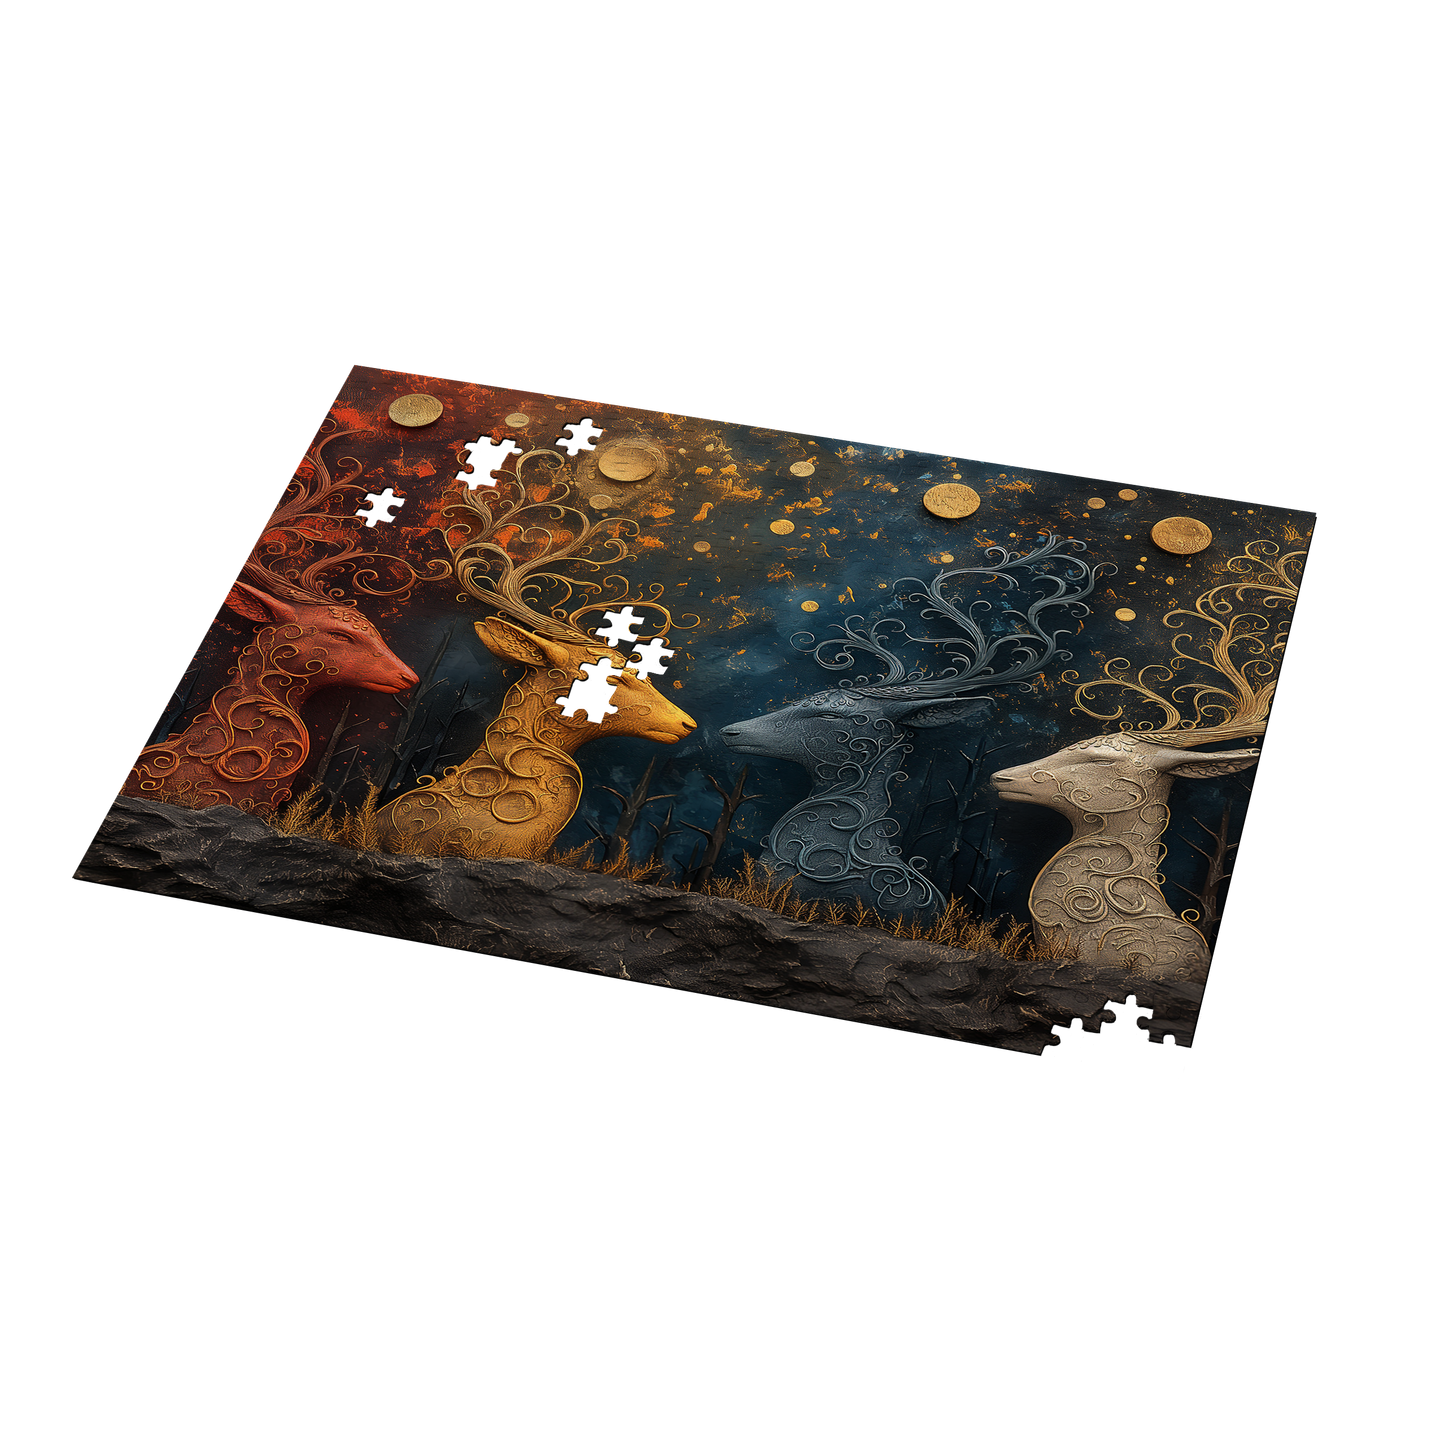 Four Directions - Premium Jigsaw Puzzle - Veradnt, Majestic, Mystical - Multiple Sizes Available